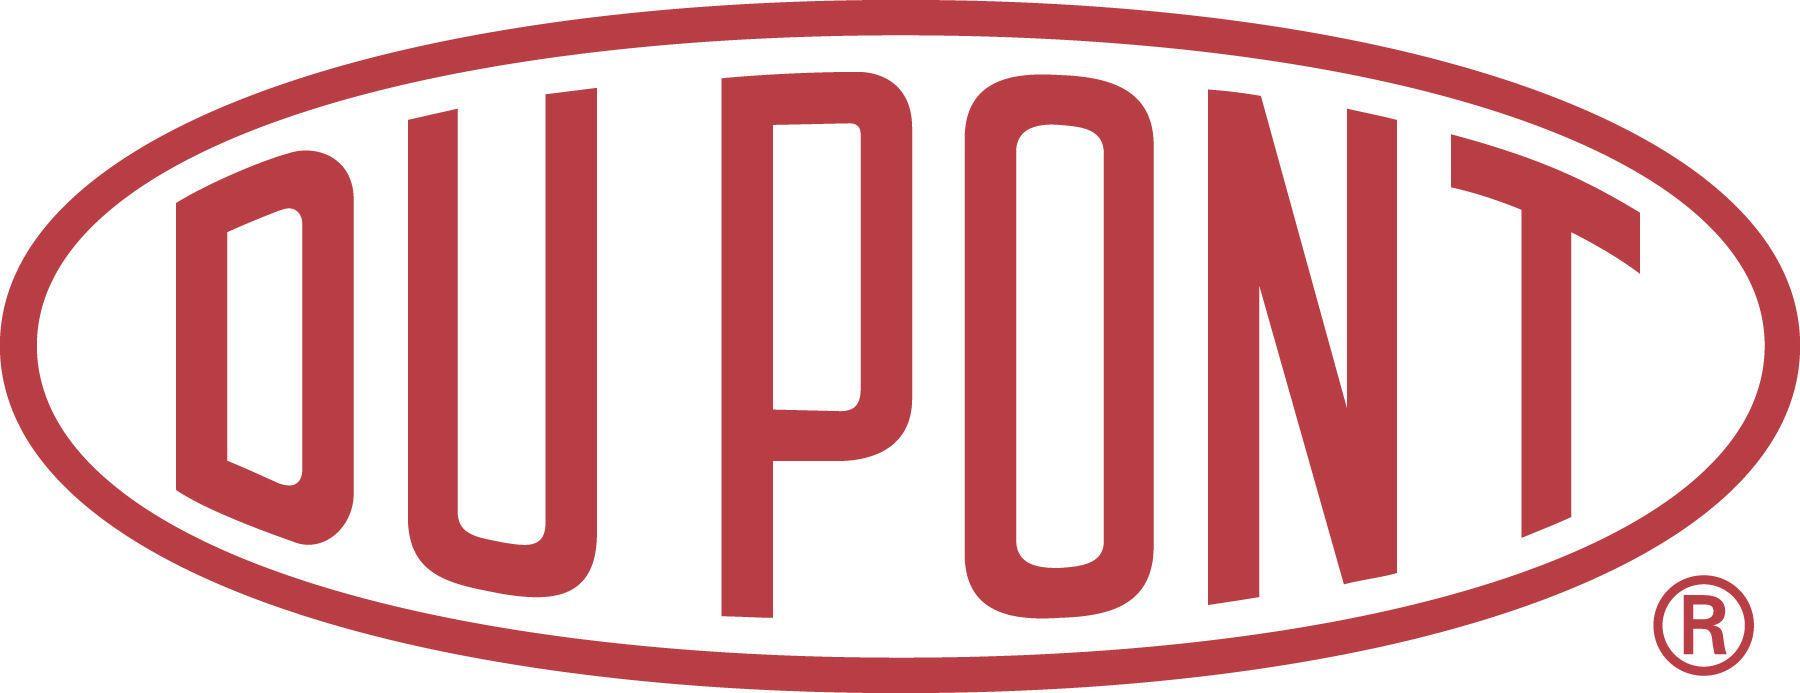 Profile with Red Oval Logo - DuPont Oval | DuPont USA